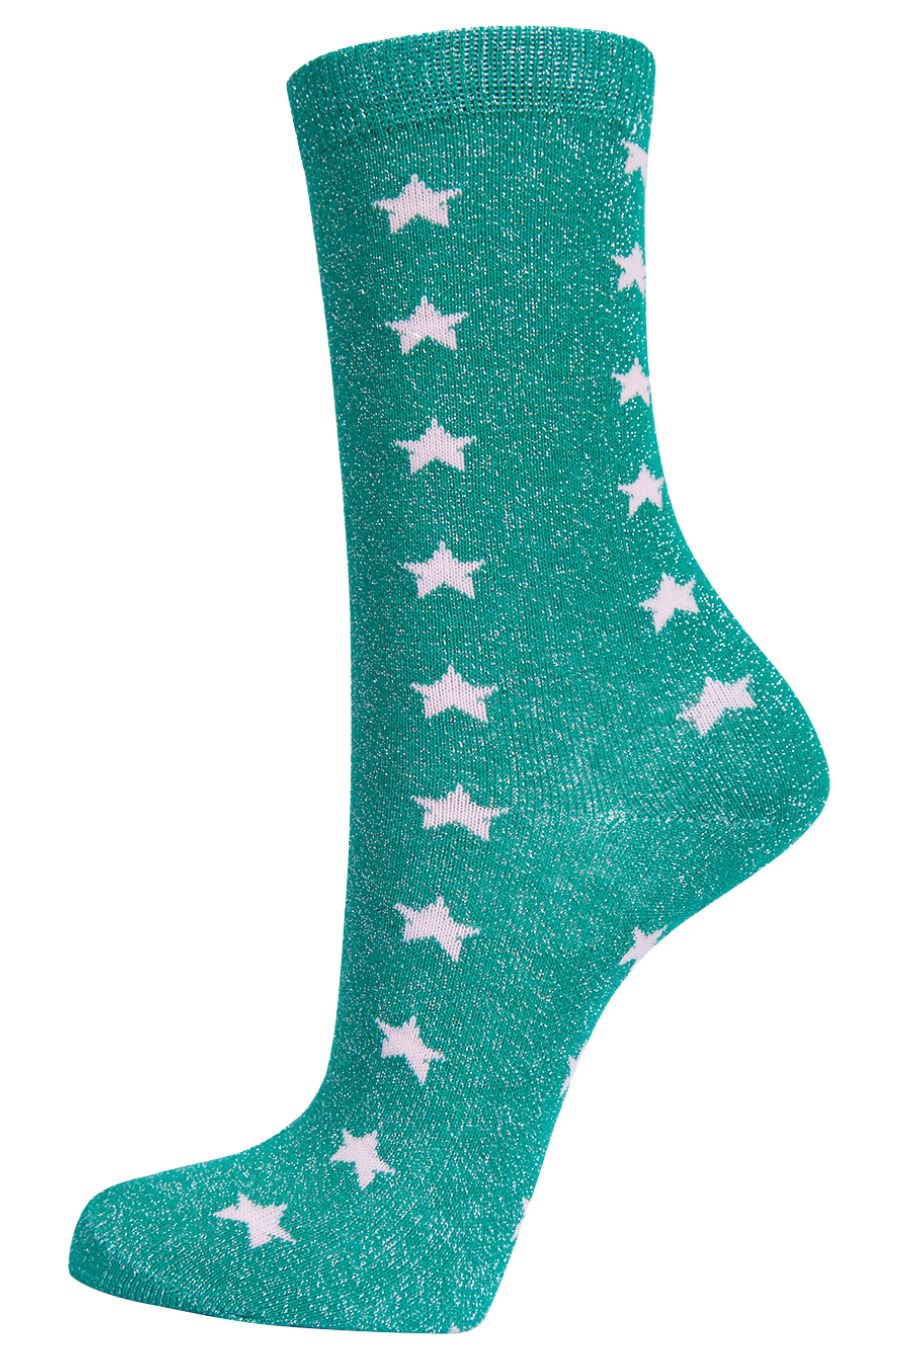 green ankle socks with a light pink all over star print and silver glitter shimmer